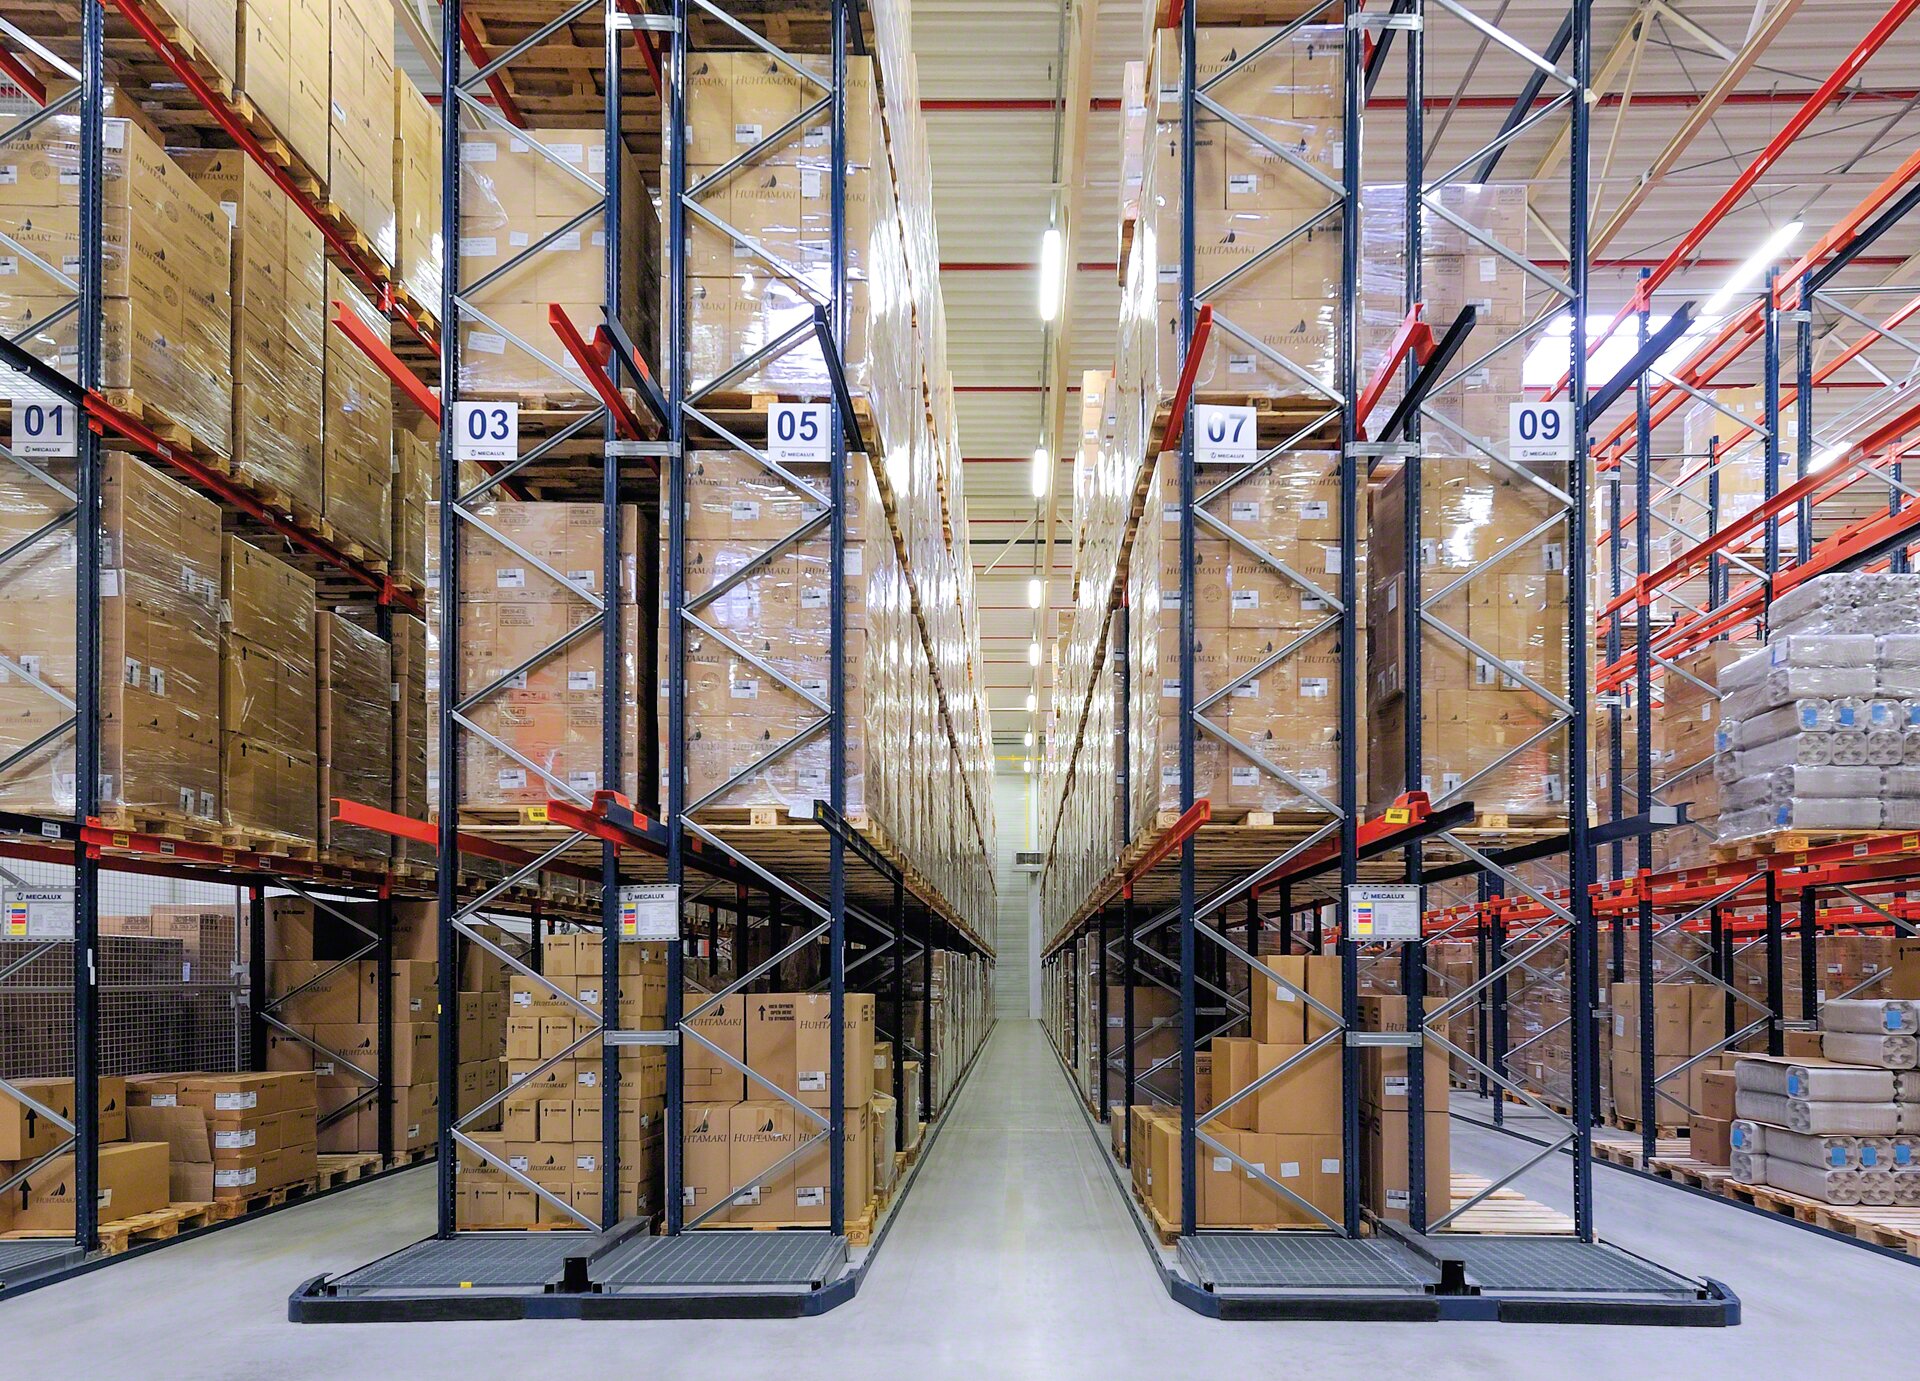 Guided system installed in narrow aisles to use with very narrow aisle forklifts